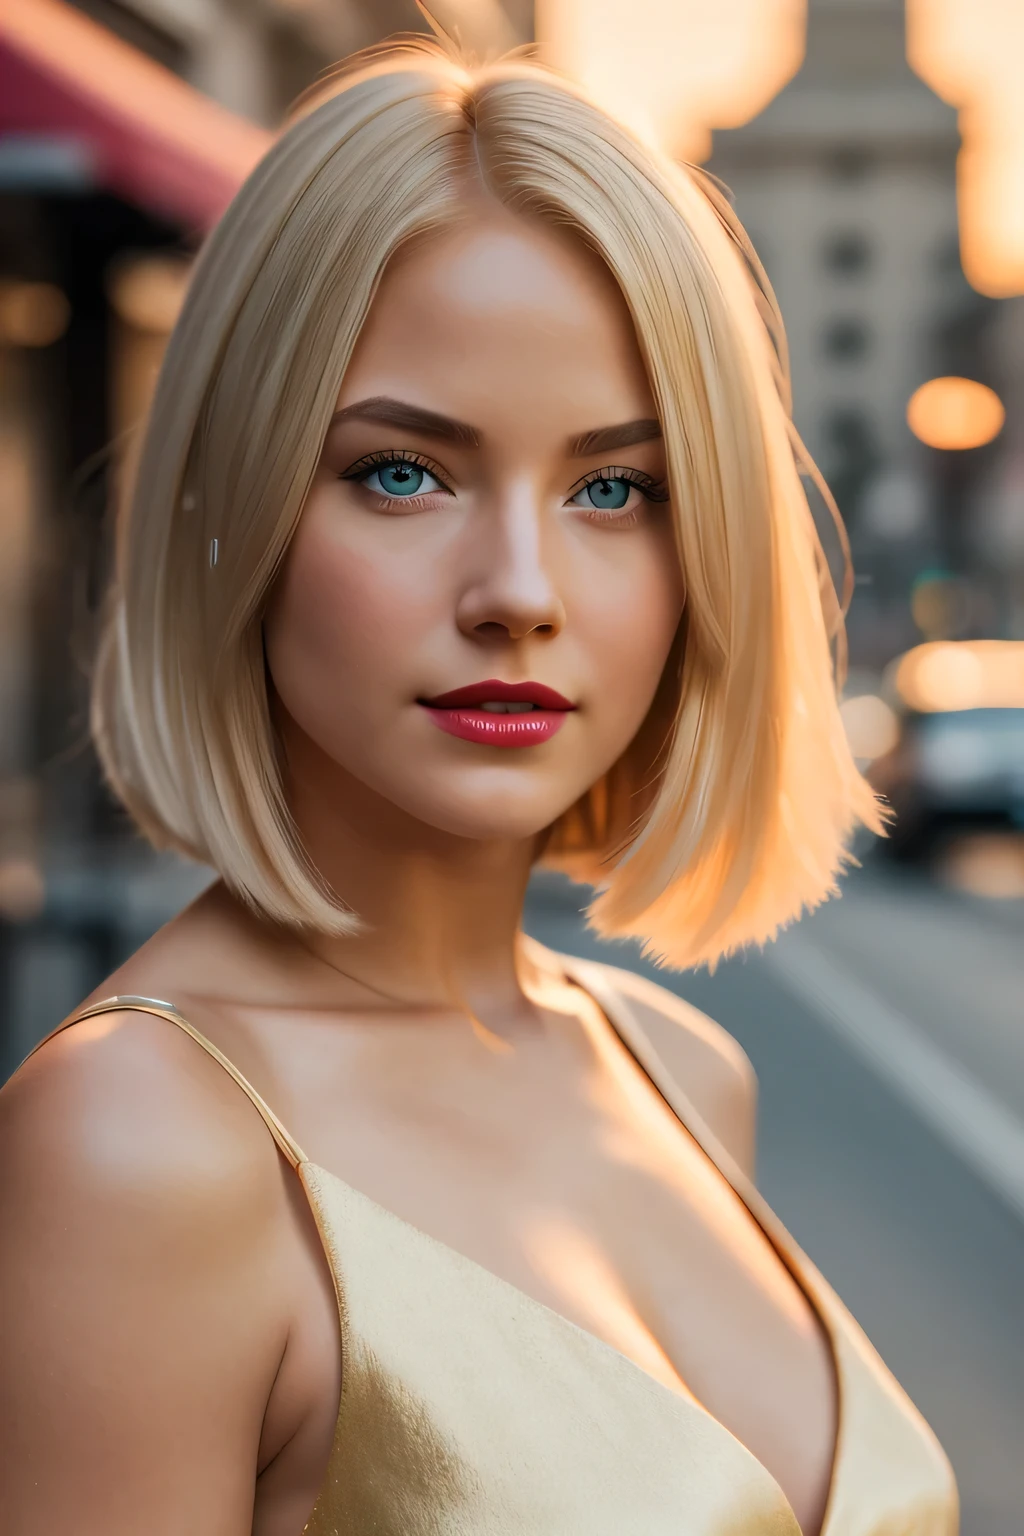 a high definition studio photography, high fidelity closeup portrait of a young ❣️ pale female ((averts her gaze)) blonde, clear eyes,  bob haircut, voluptuous brigtht red lips, with a mischievous smirk and a look away, finest skin details emphasized by harsh lit, realest soft shadowing, focused, loose dress, femininity in motion, city street background, photography quality, high detail, high quality. Golden hour, Lexica Aperture v3.5